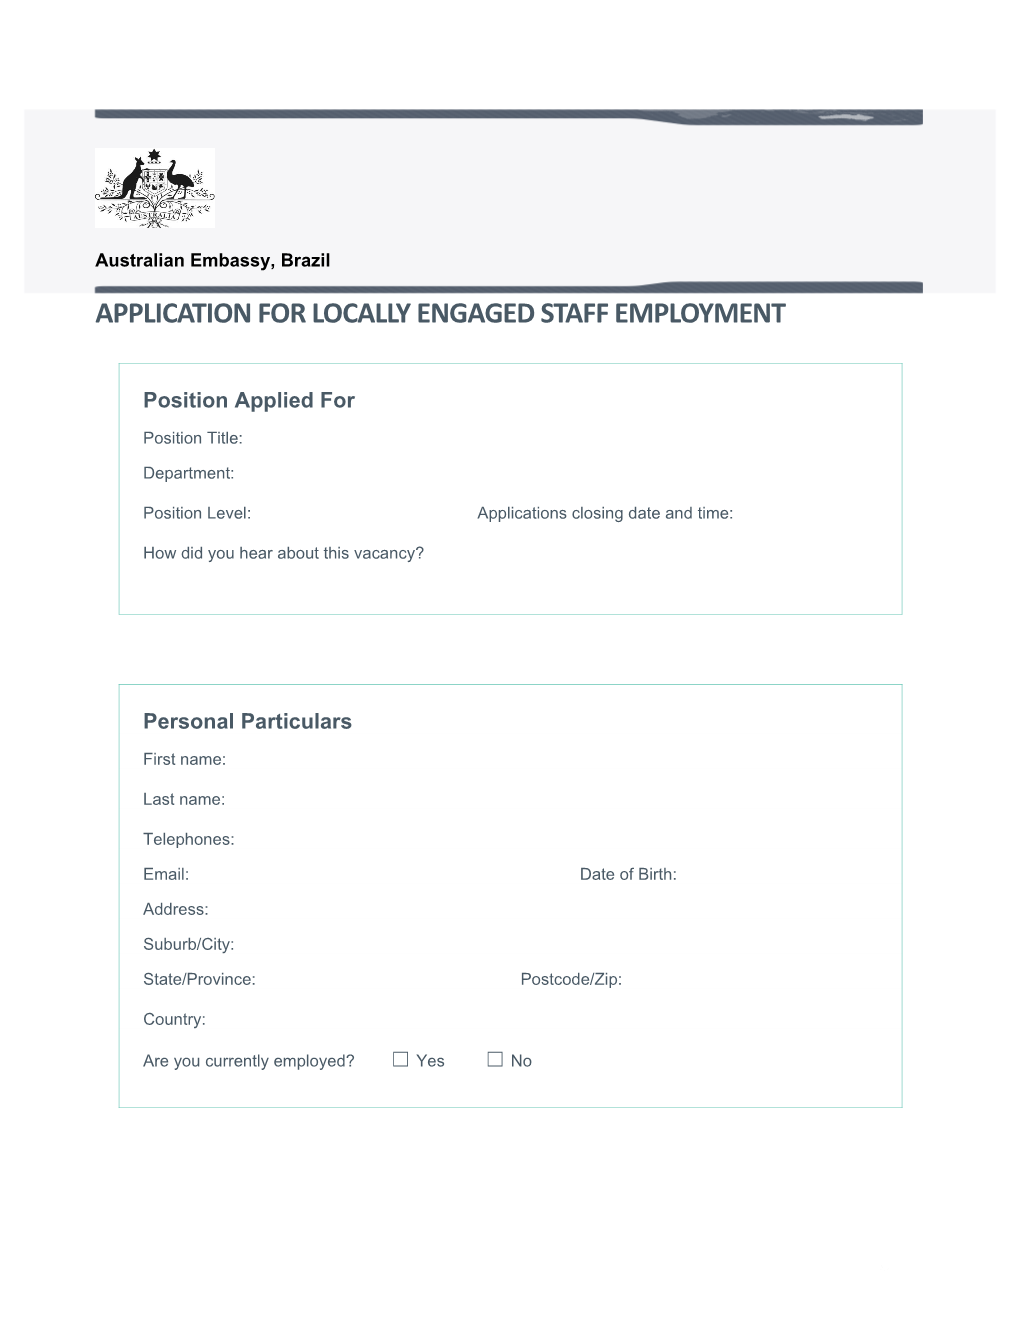 Application for Locally Engaged Staff Employment